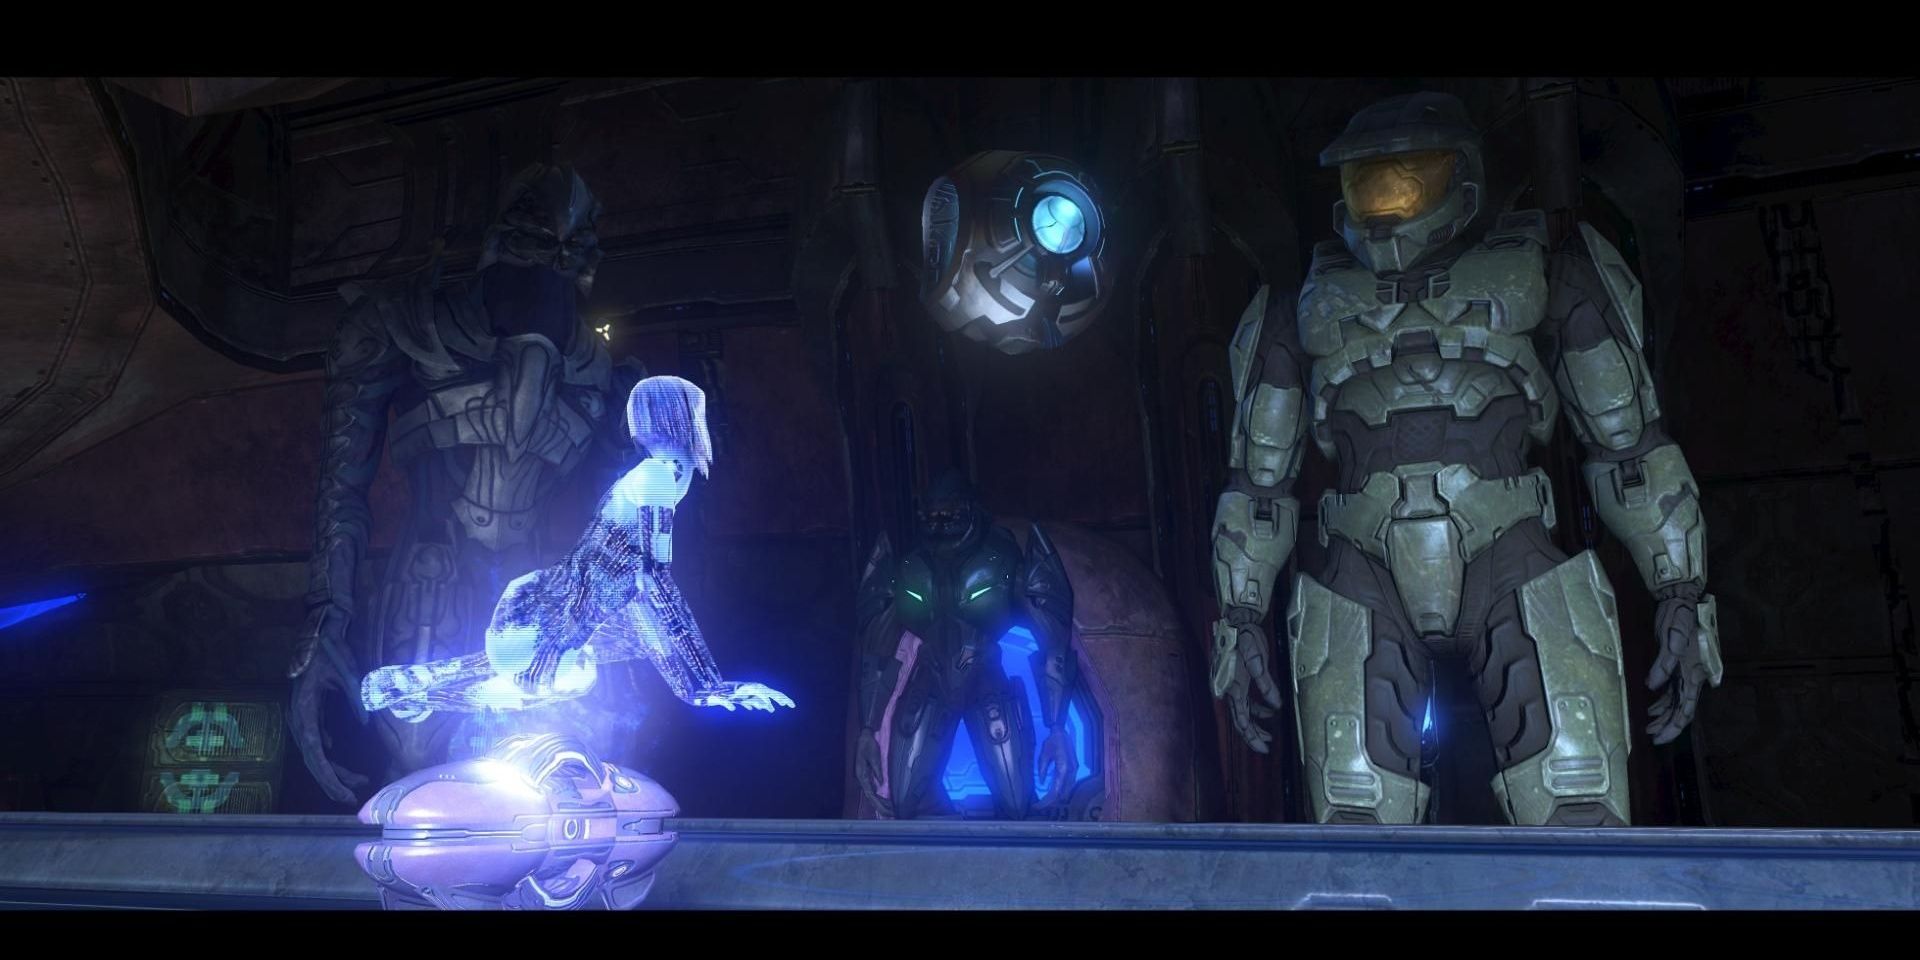 Cortana's distress message for the Chief in Halo 3.